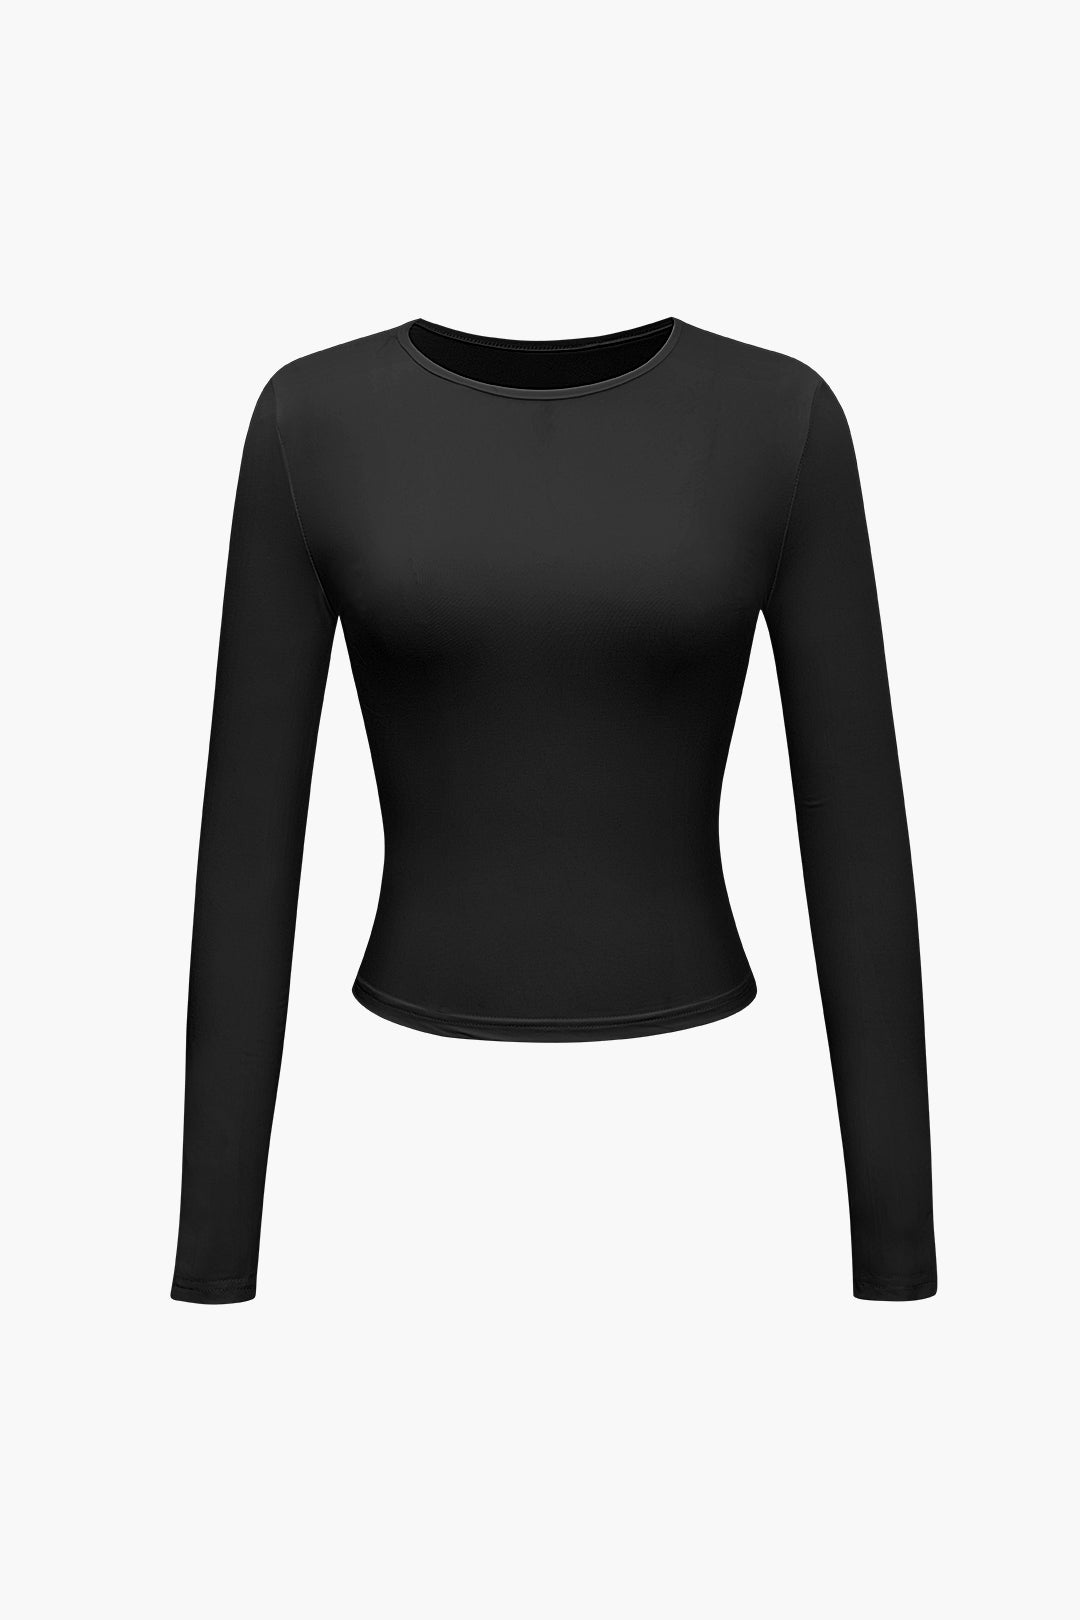 Basic Solid Round Neck Long Sleeve Top